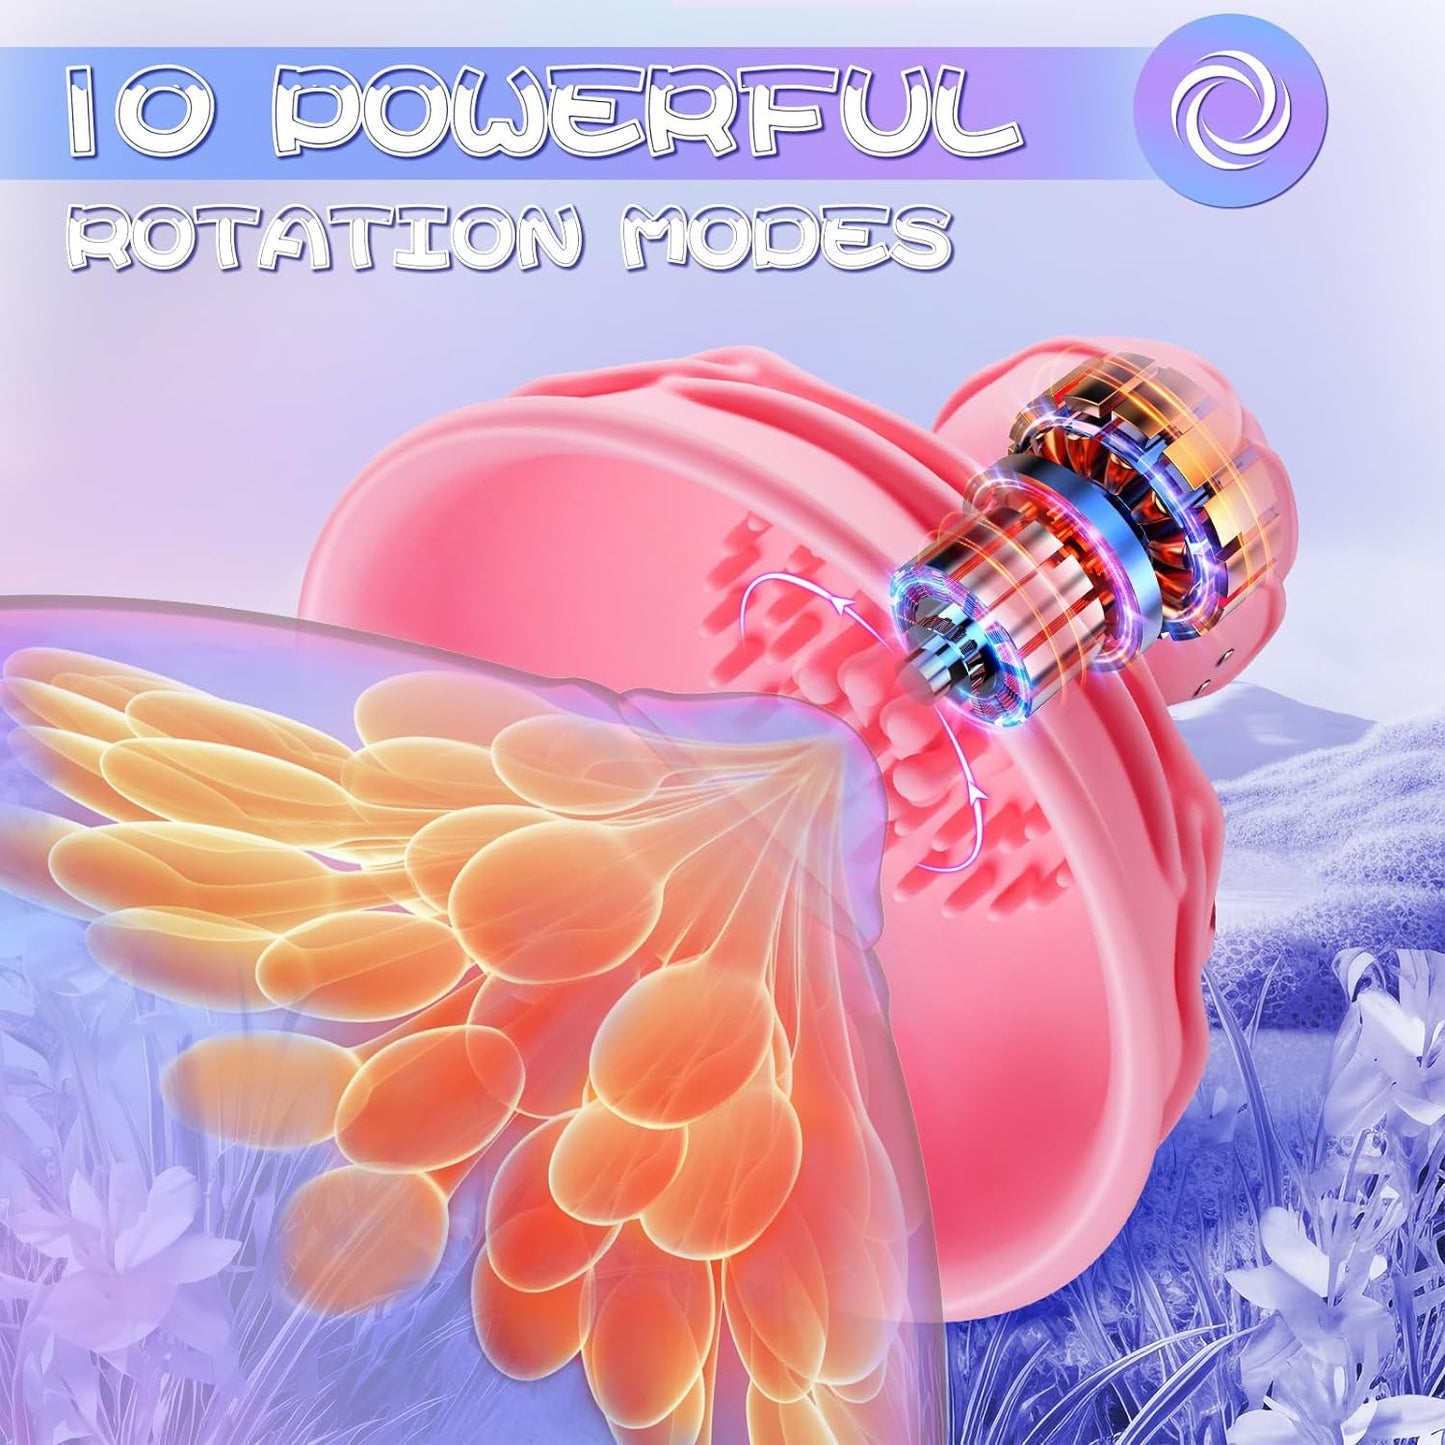 Nipple Toys Sex Toys for Women- Female Sex Toys adylt Toys Sucking Stimulator with 10 Rotating for Nipple Clitoral Vibration